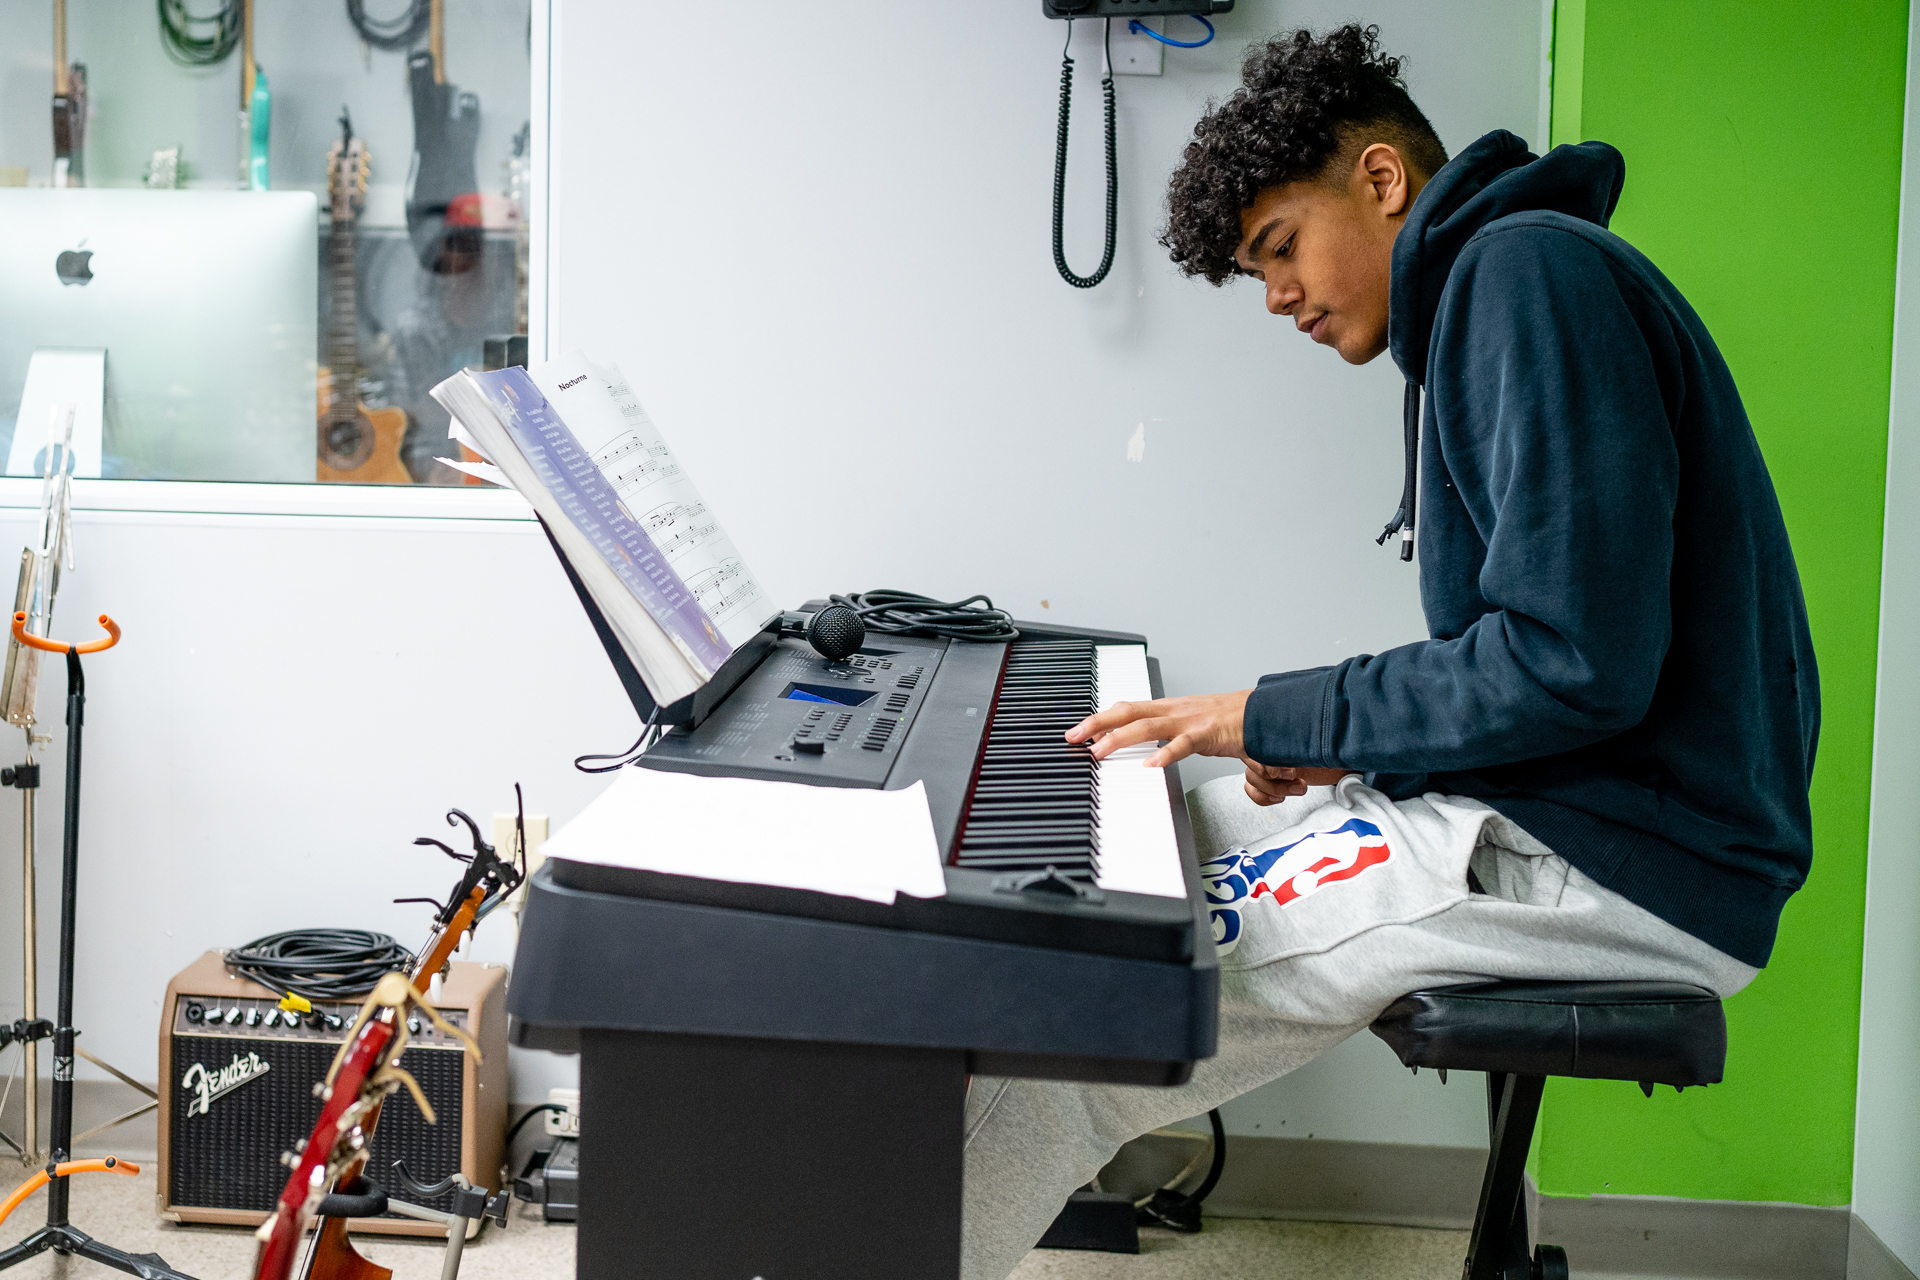 18-year-old Evan practices piano in the music studio at Teen Stop Jeunesse